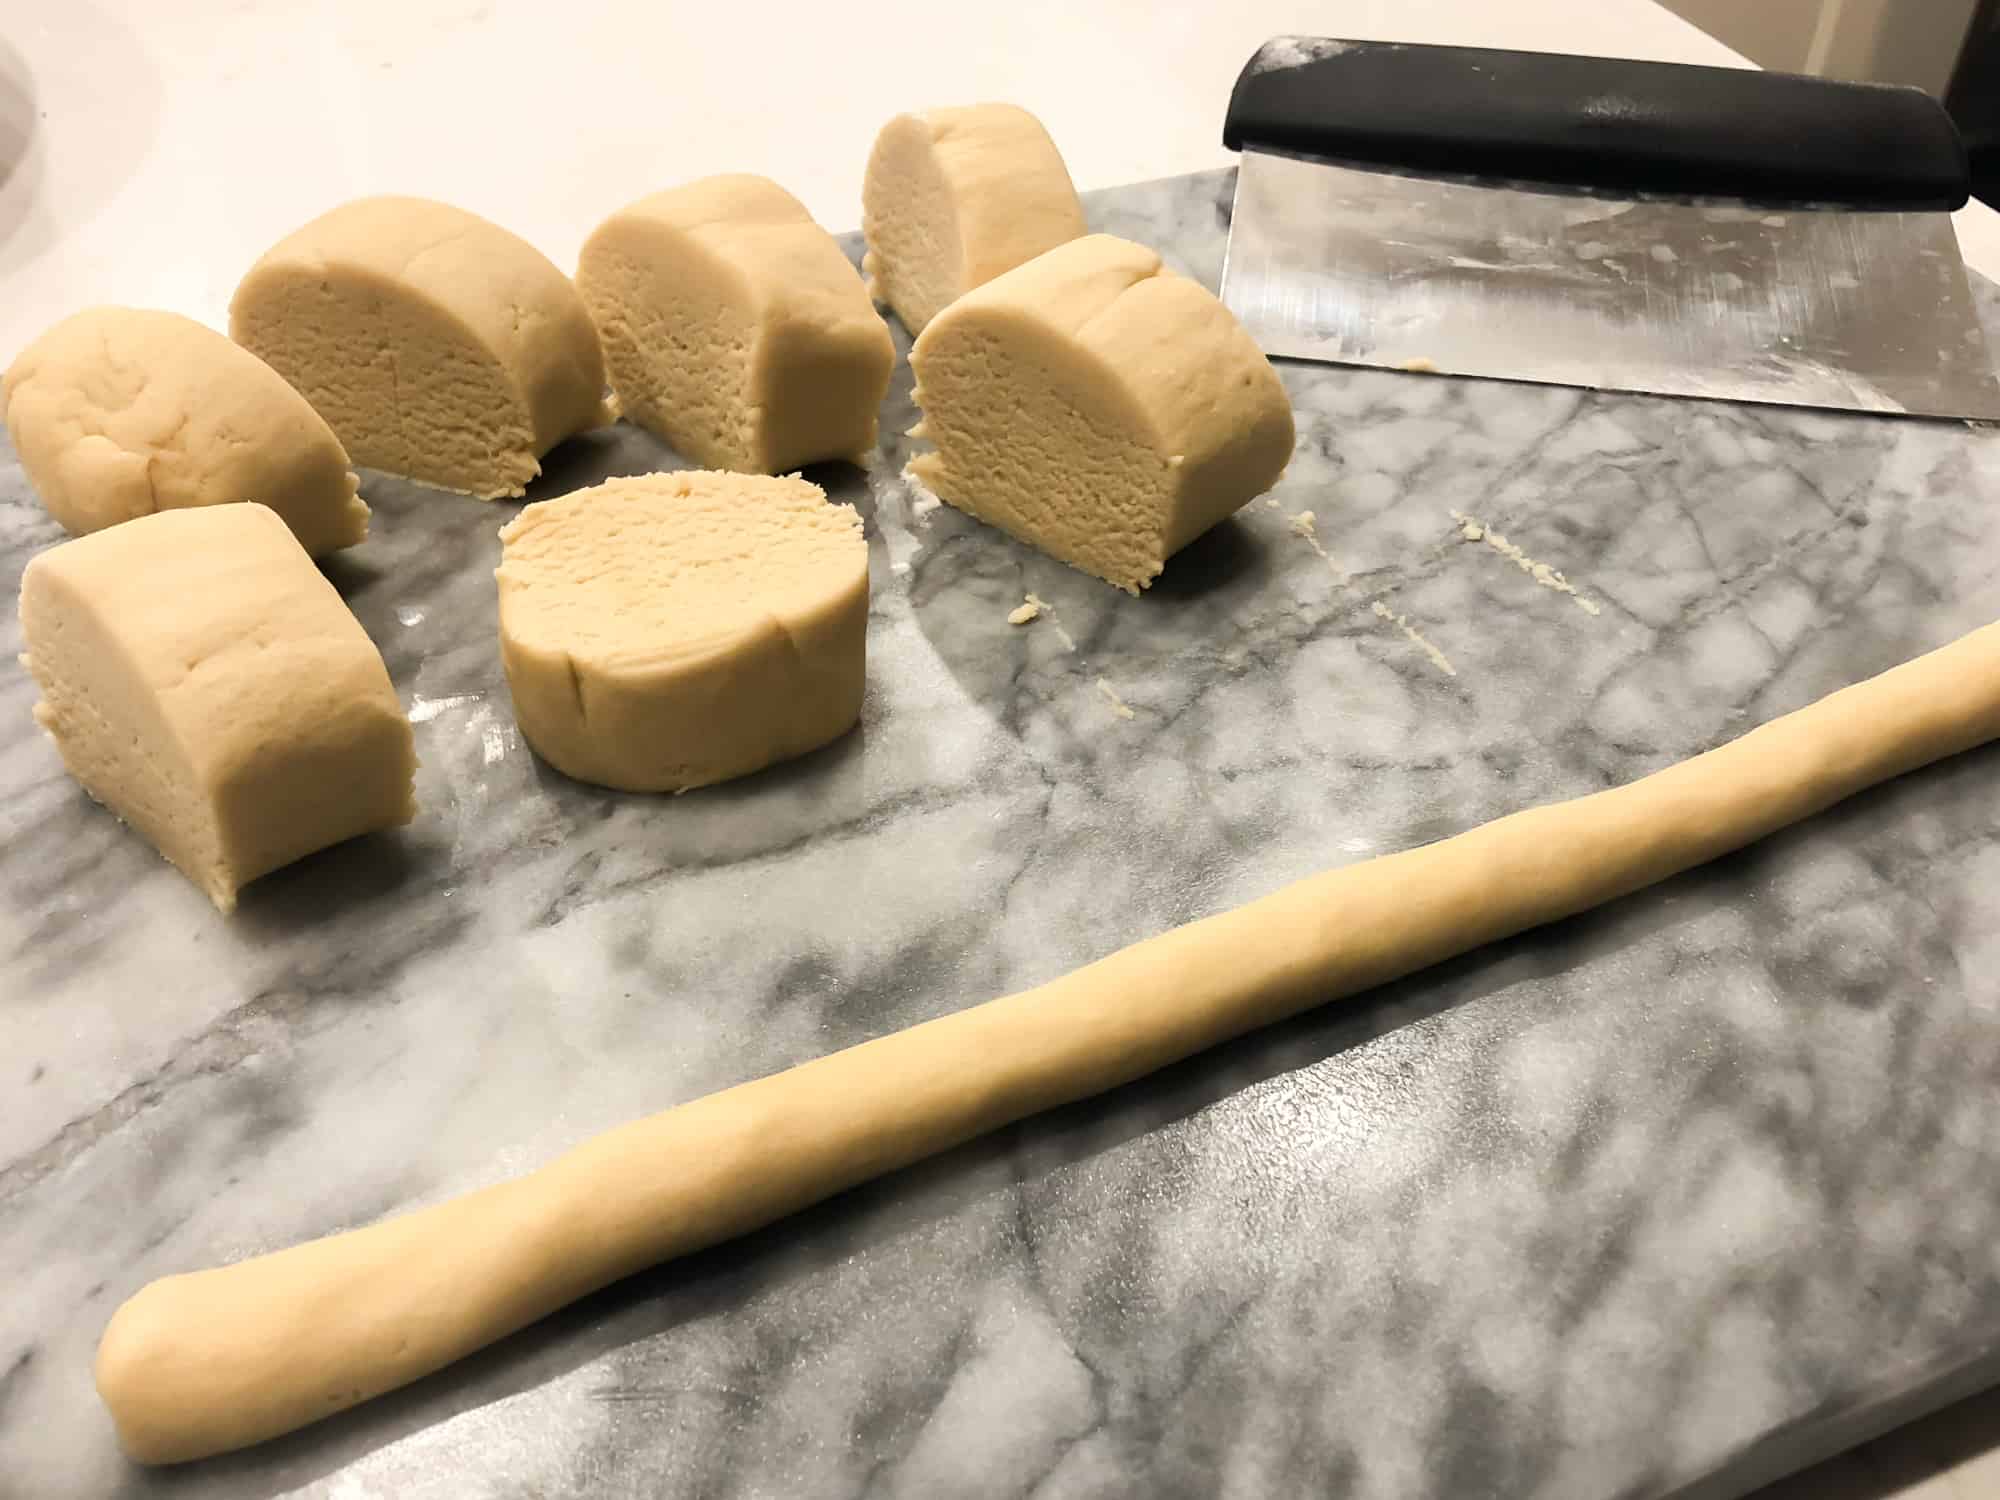 Roll the shortbread cookie dough into log shapes